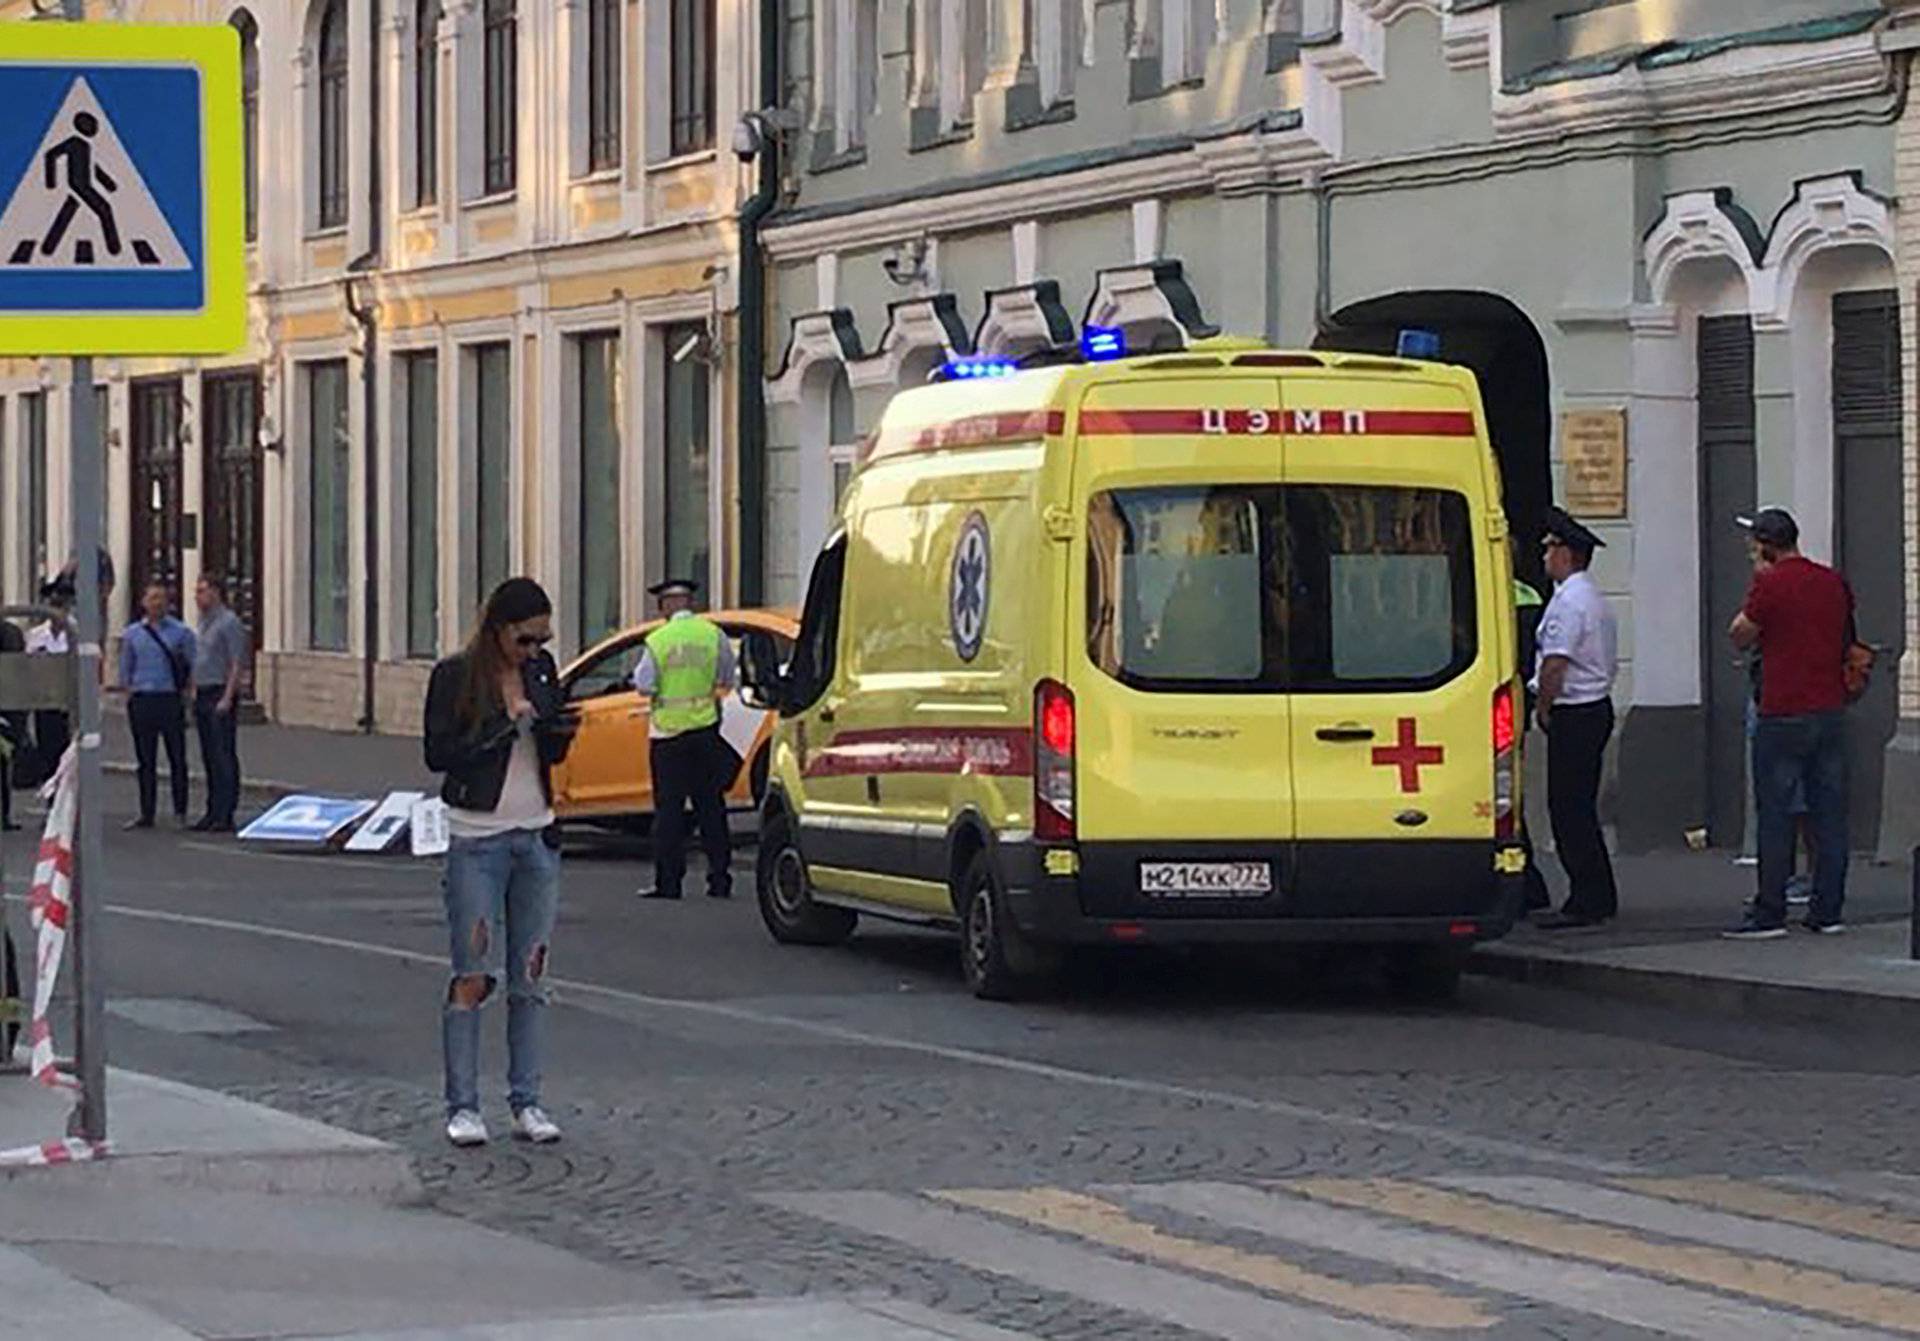 An ambulance is parked near a damaged taxi, which ran into crowds of people in central Moscow